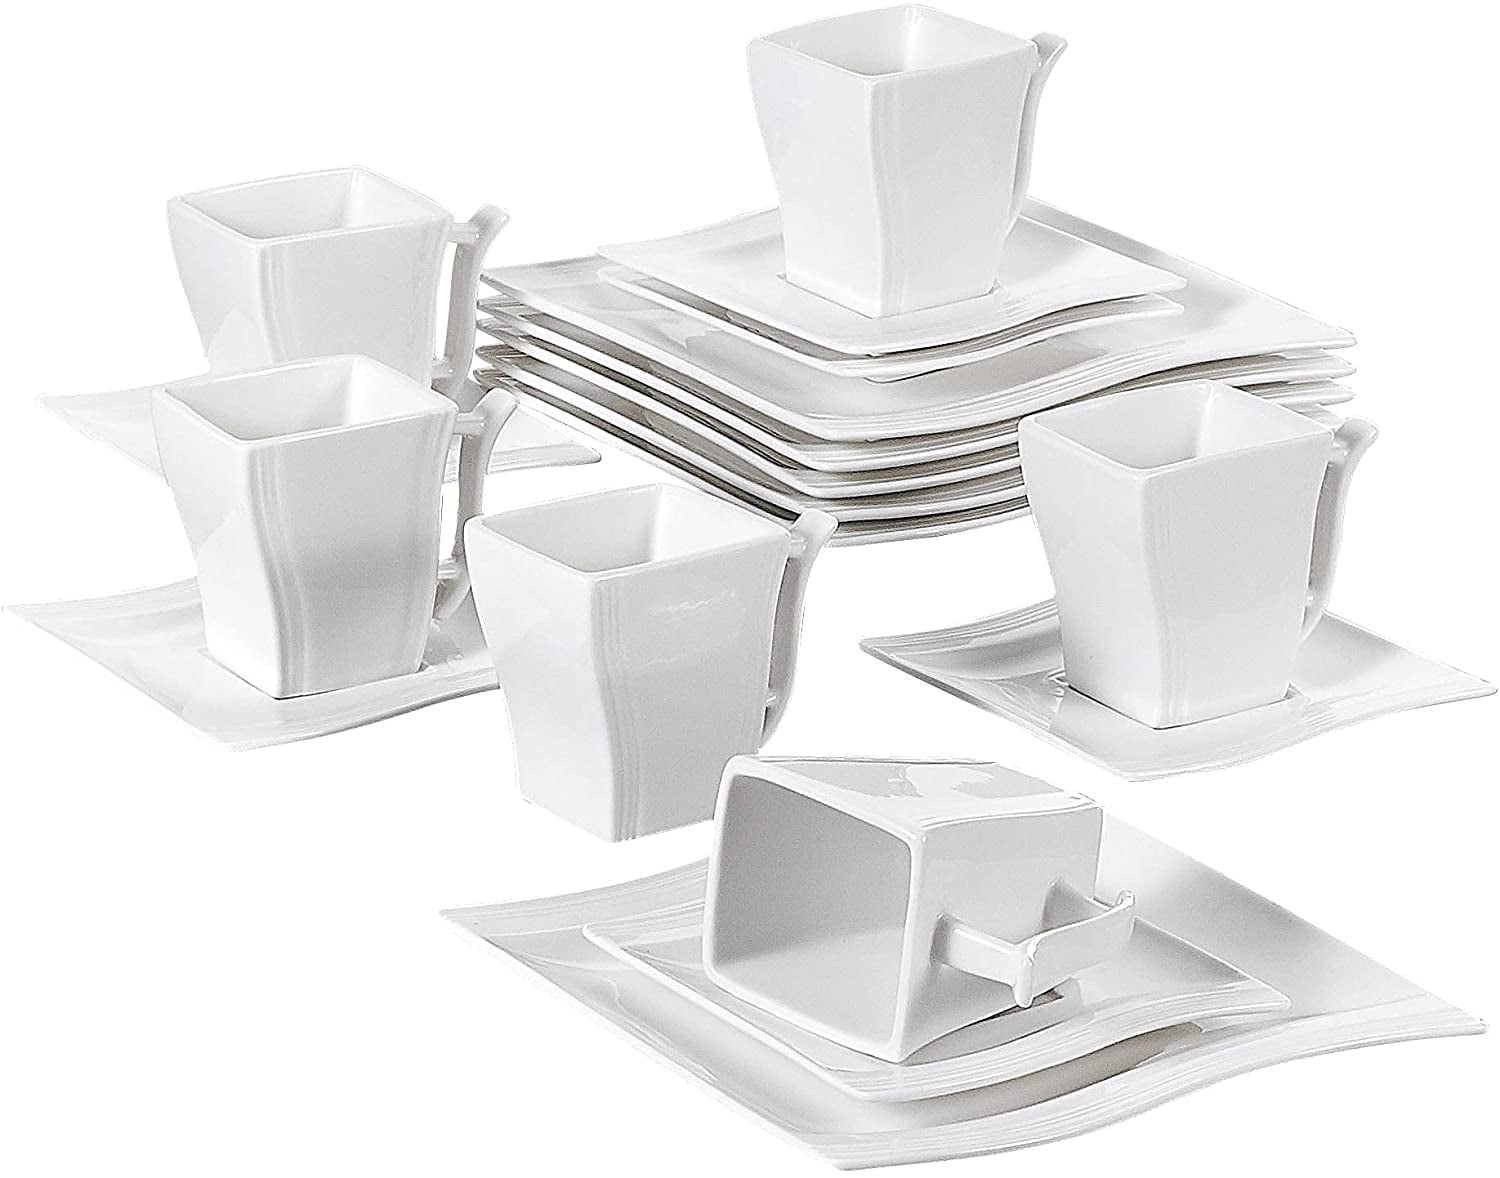 36-Piece Dinner Set Wave Shaped Ivory White Porcelain Coffee Set with 12-Piece Cups/Saucers/Dessert Plates Service for 12 People Series Flora MALACASA 